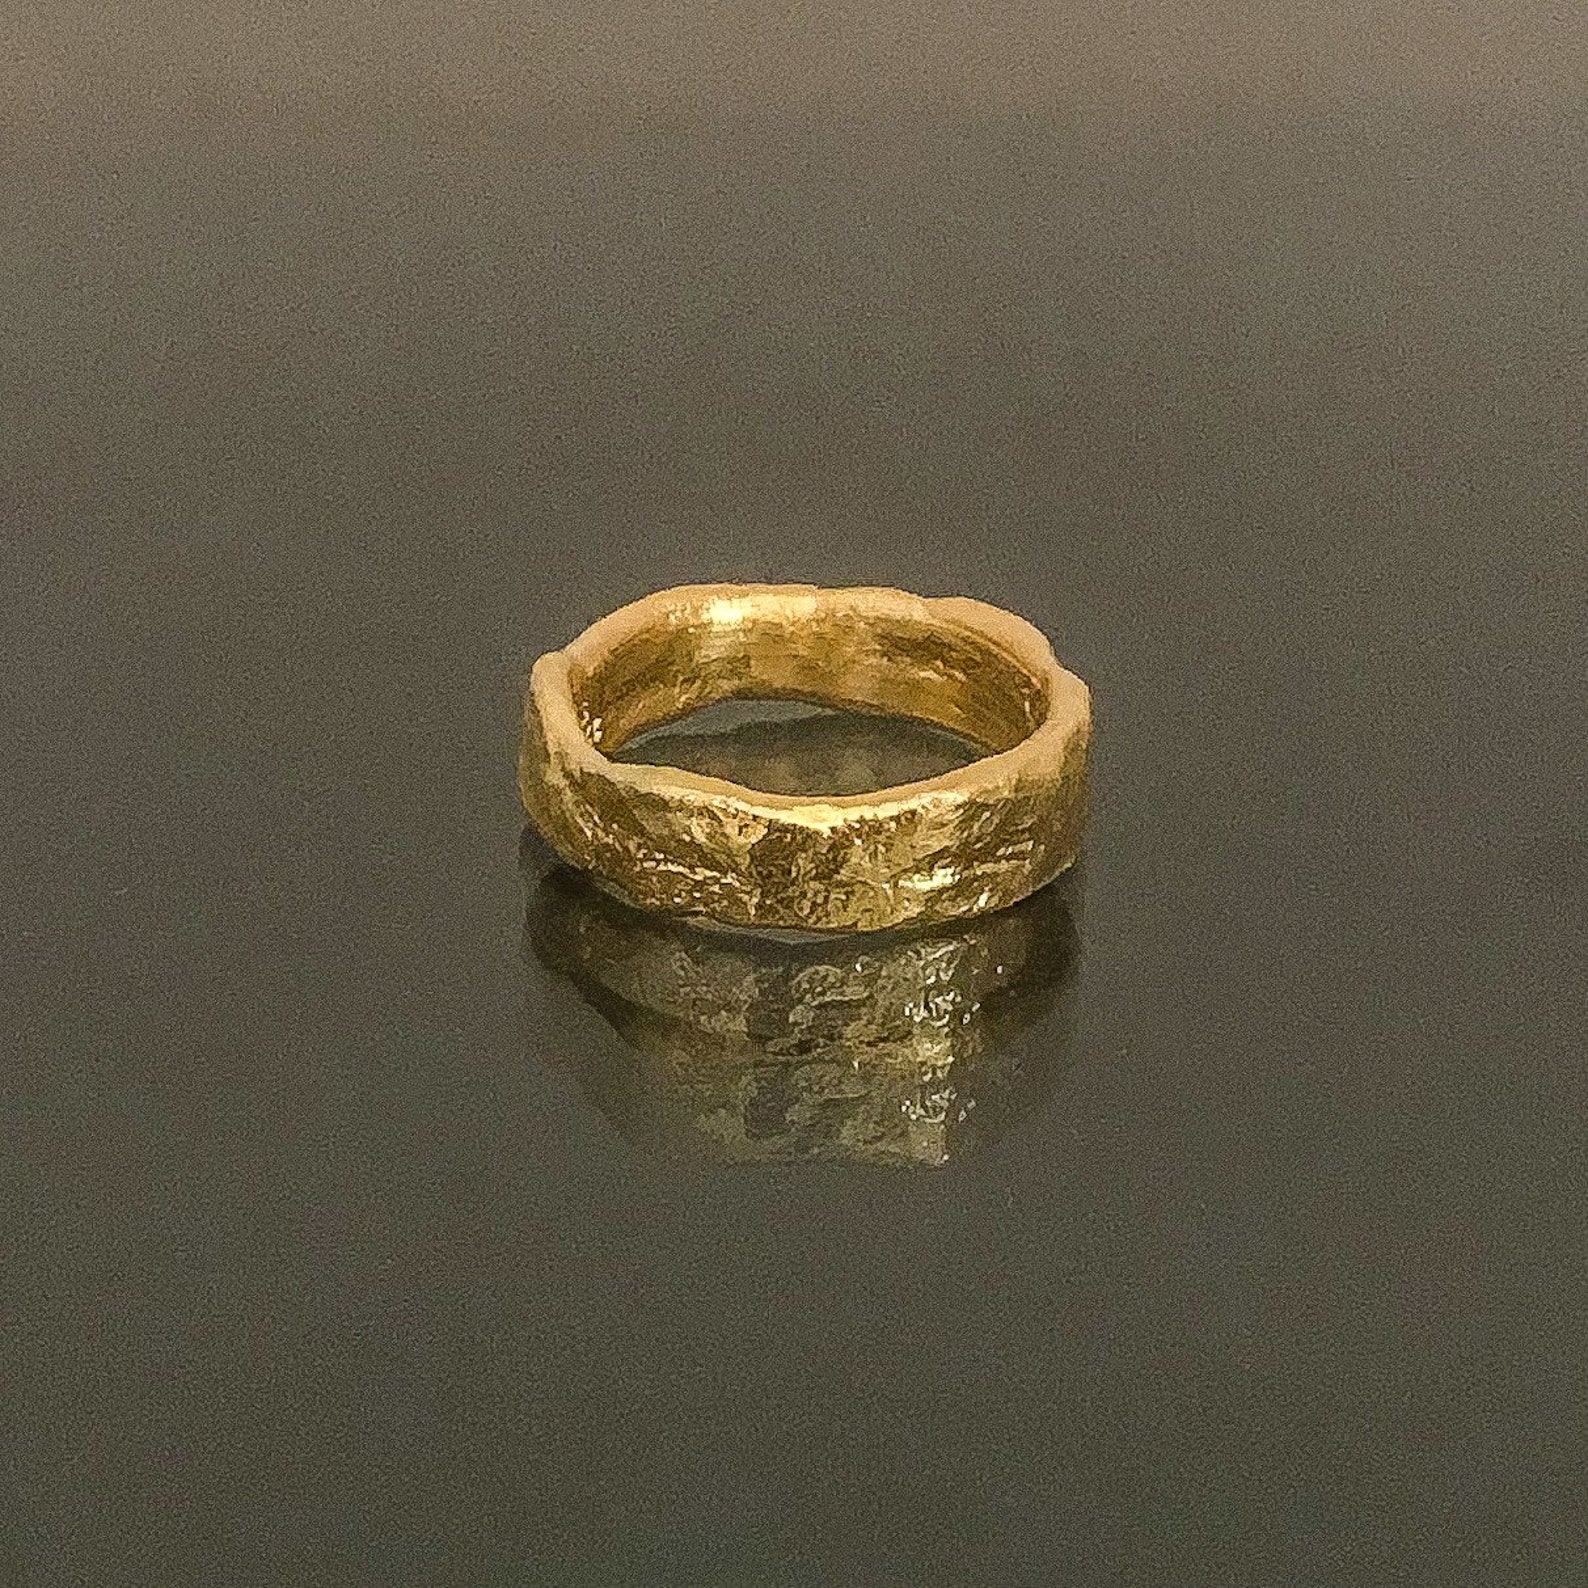 Smashing Rough Looking 22k Solid Gold Wide Wedding Ring | Etsy